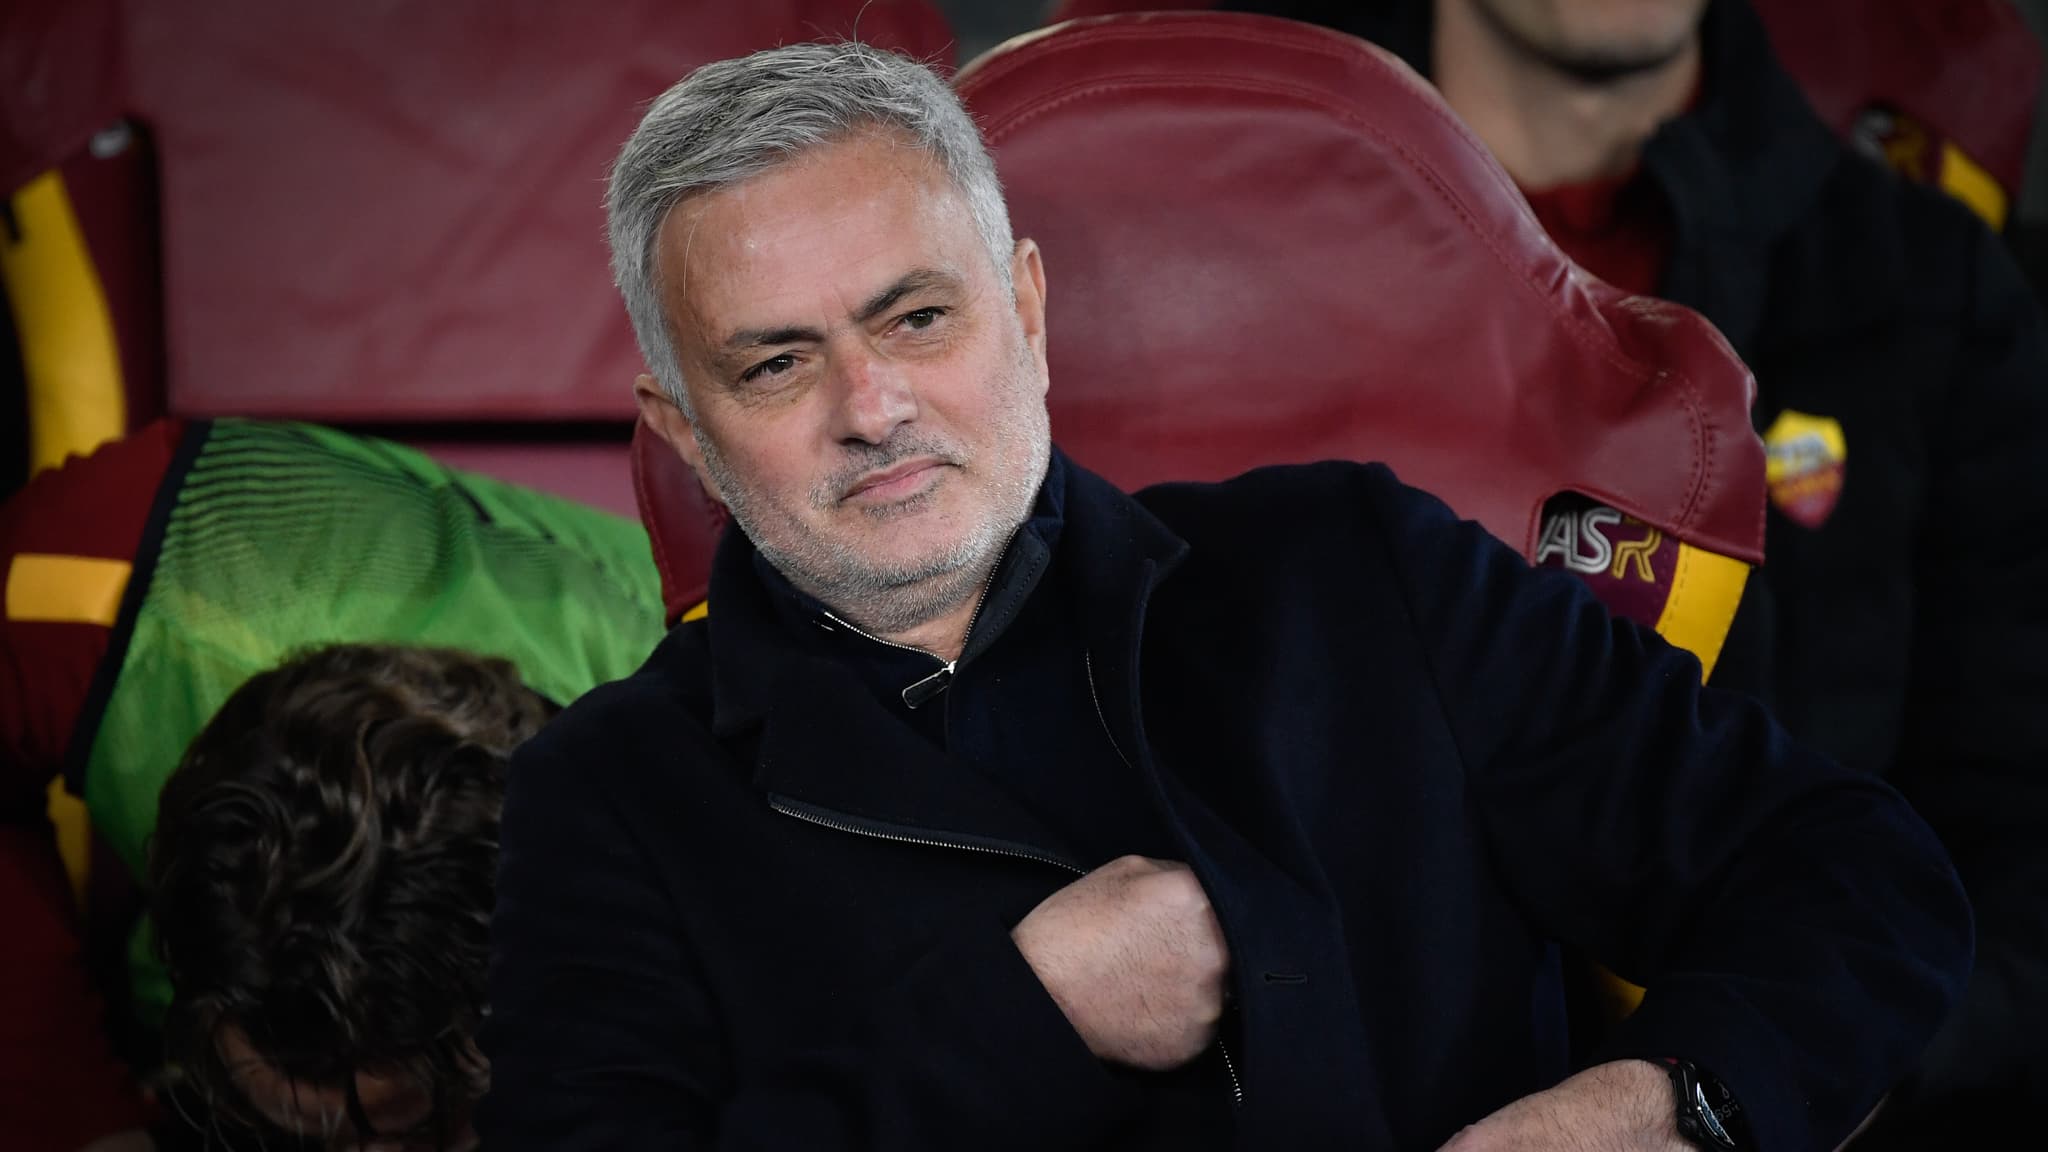 Mourinho in Paris Saint-Germain?  The Portuguese coach laughs, “If they look for me, they can’t find me.”